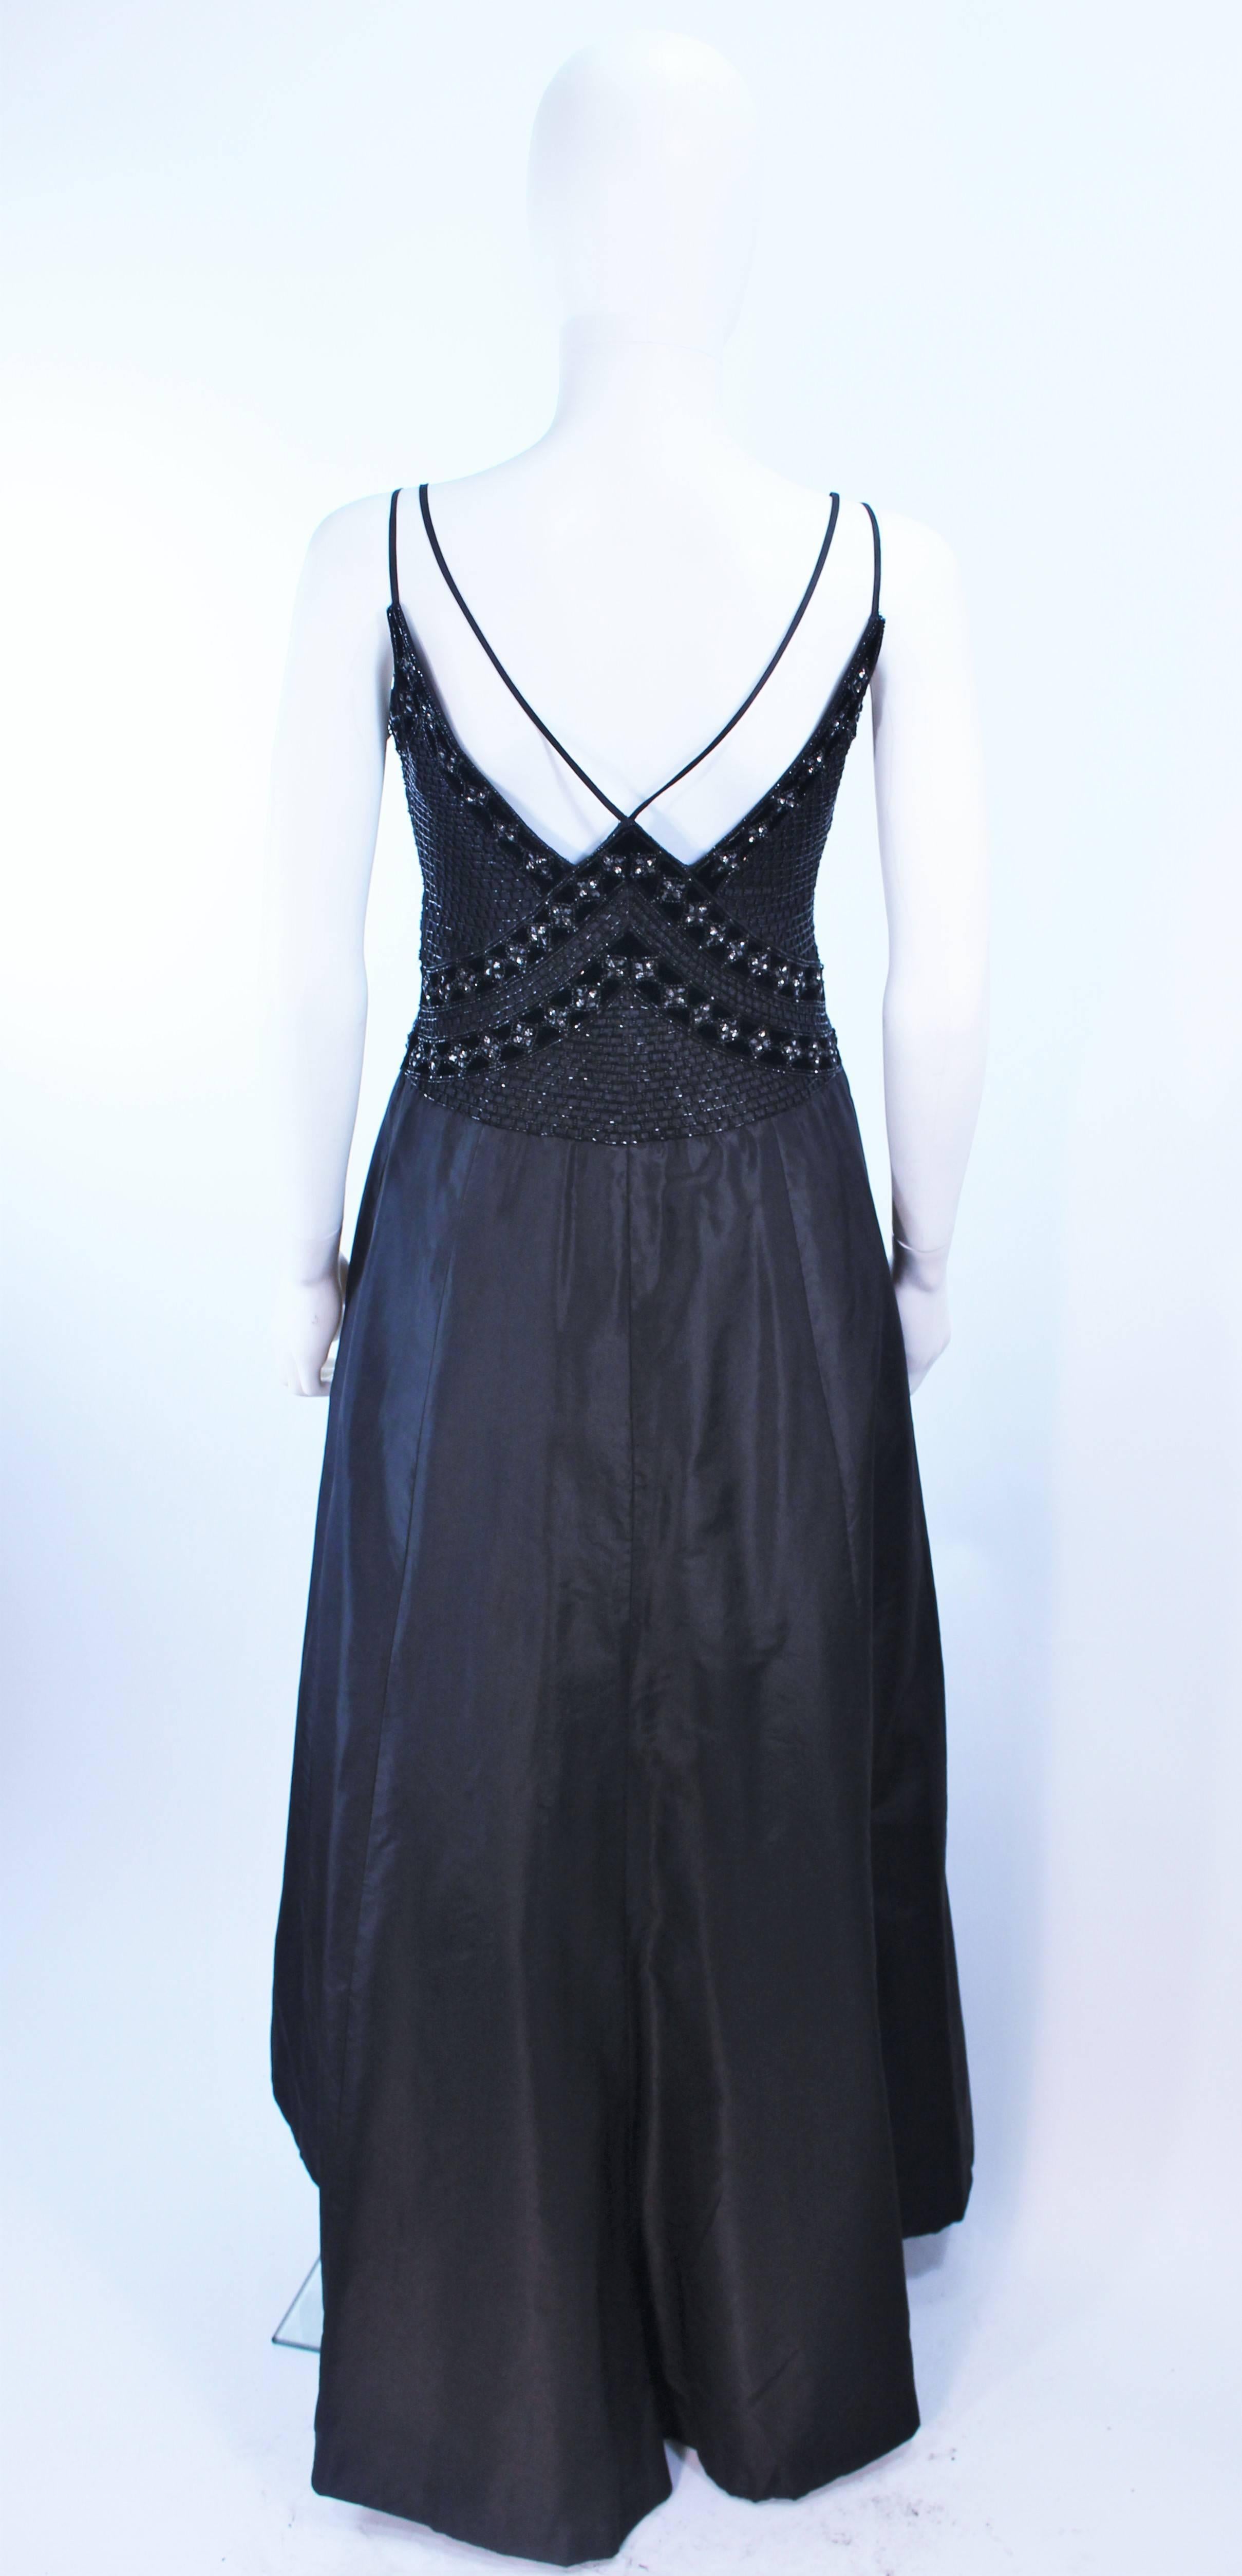 BADLEY MISCHKA Black Satin Beaded Gown with Rhinestone Accents Size 4  For Sale 2